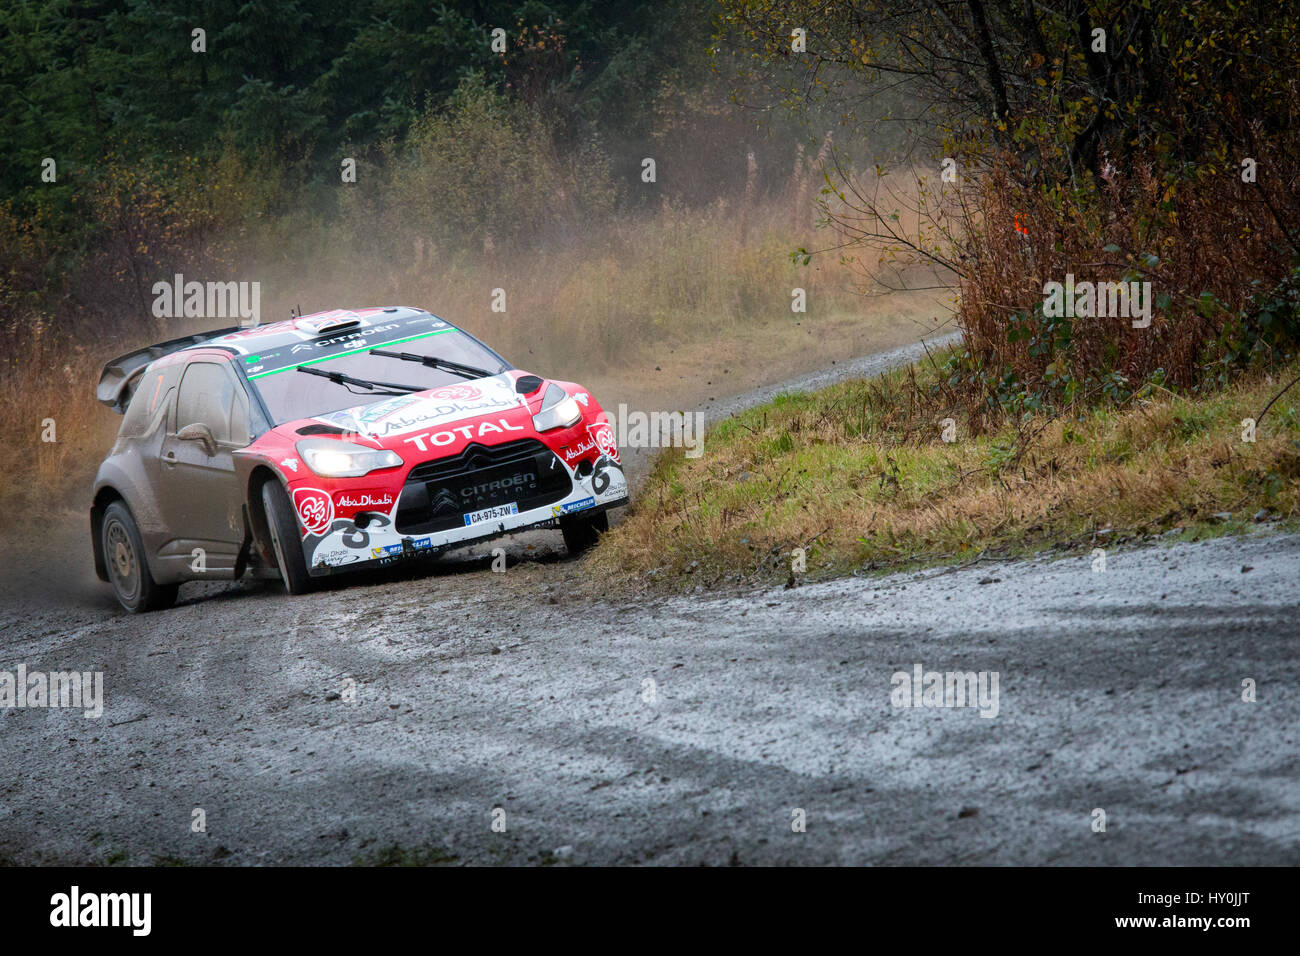 Kris Meeke in the Citroen DS3 World Rally Car on the Dyfnant Stage of the 2016 Wales Rally of Great Britain, part of the FIA World Rally Championship Stock Photo